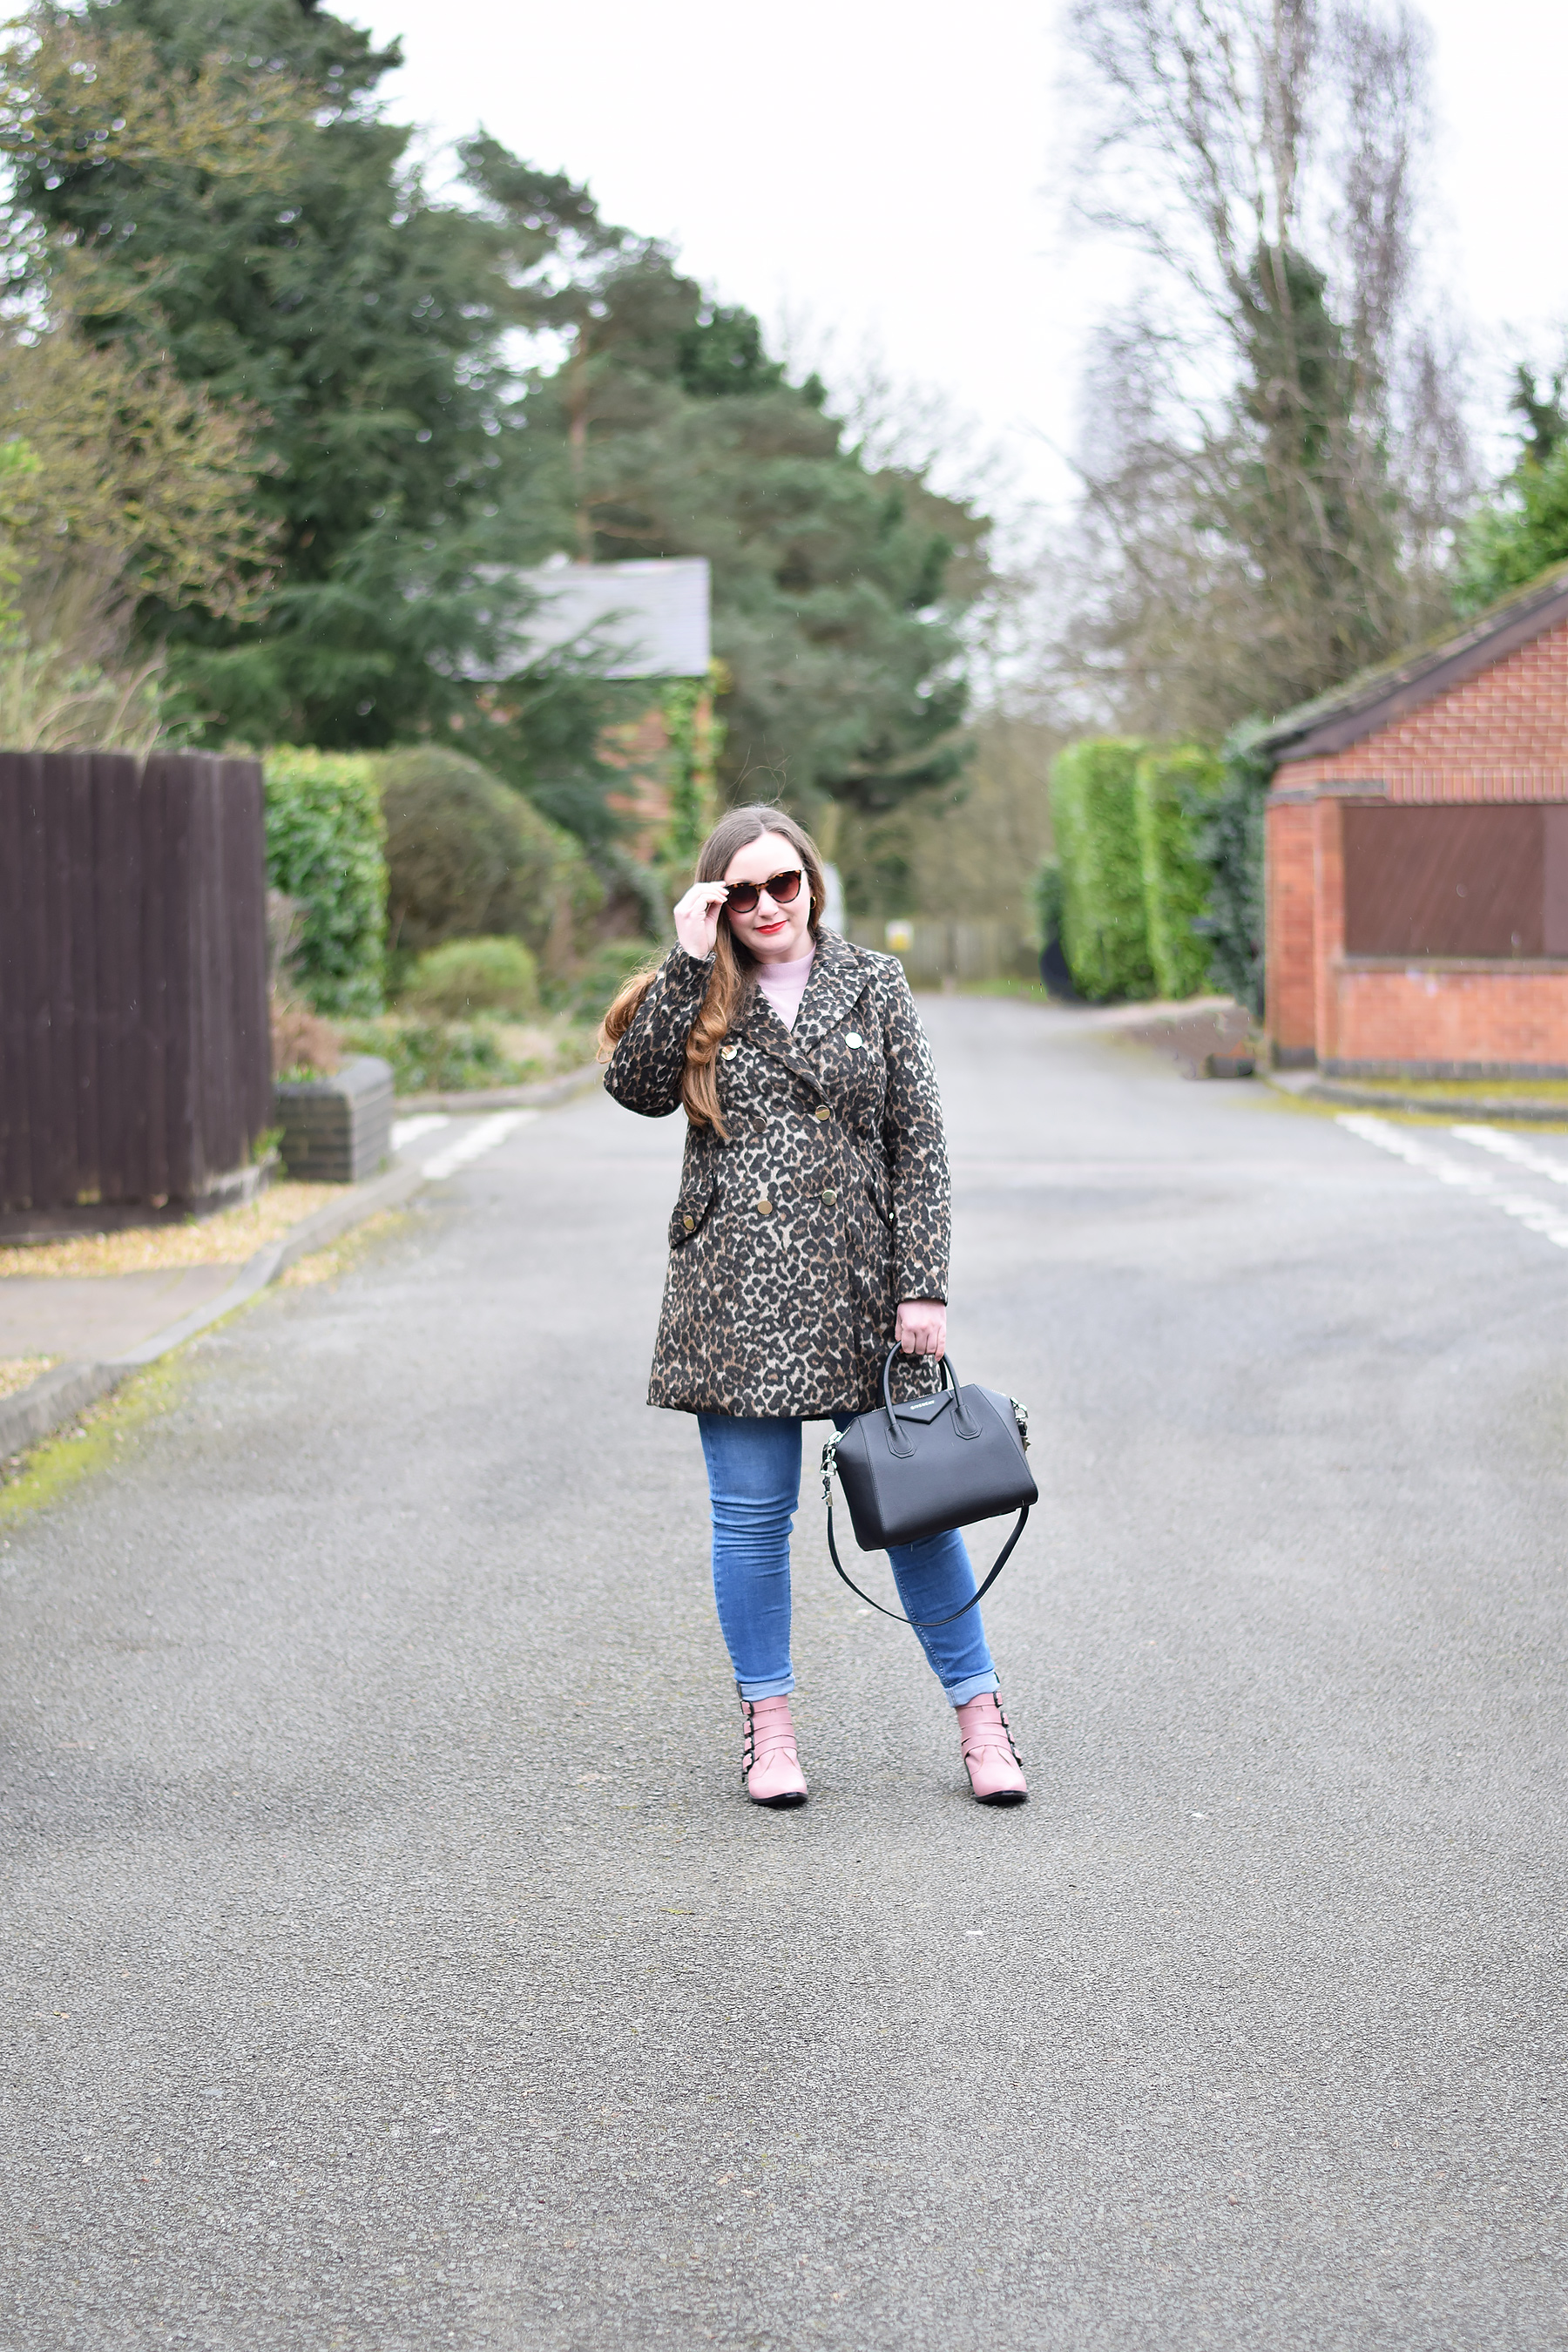 HOW TO WEAR A LEOPARD PRINT COAT AND PINK JUMPER